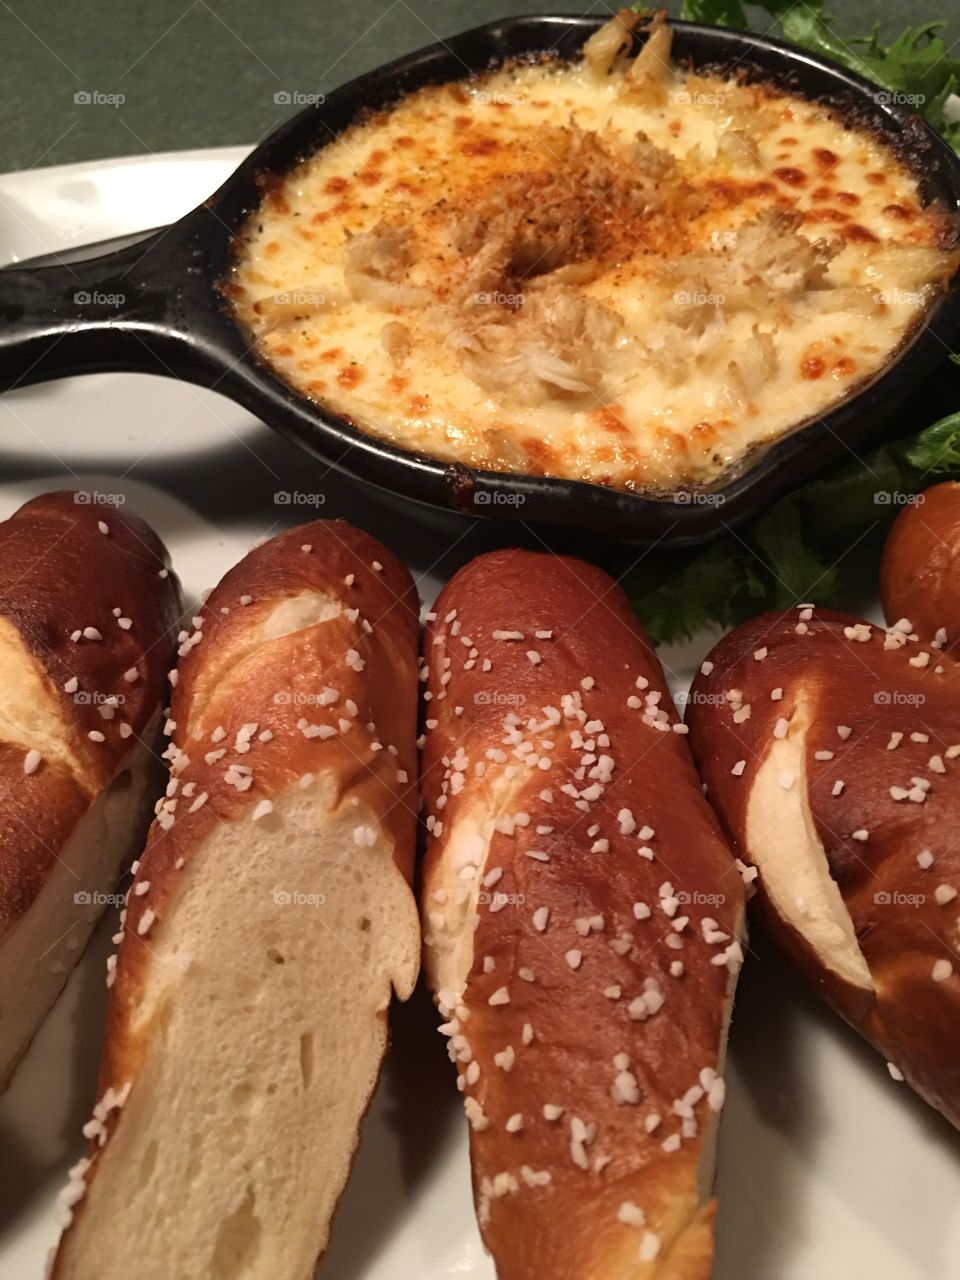 Beer Cheese Dip With Pretzel Bread From The Greene Turtle Restaurant.